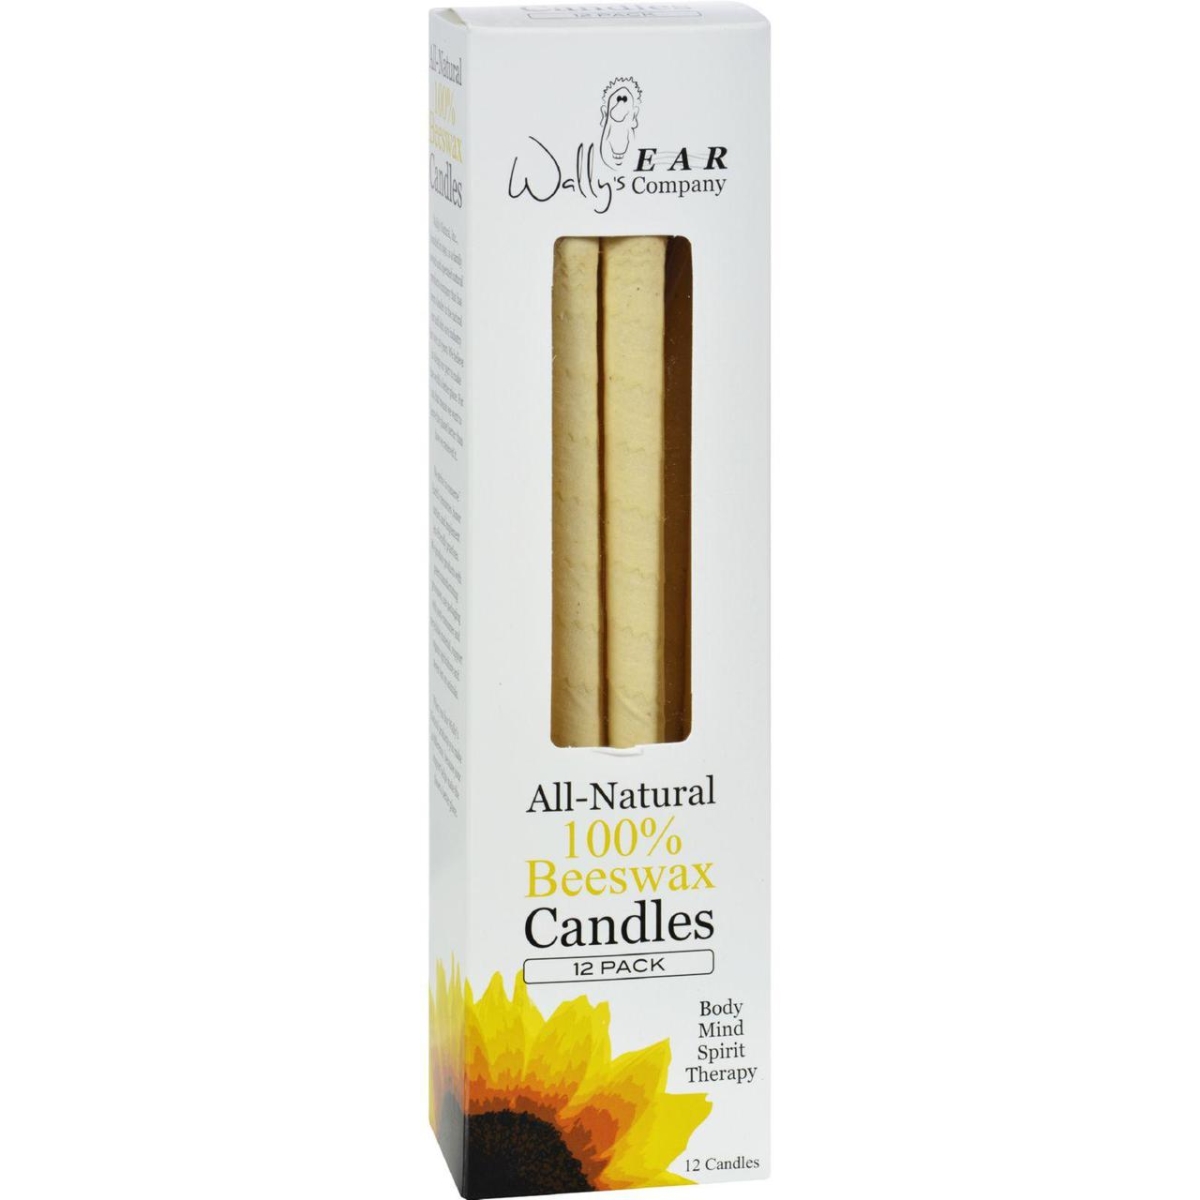 Hg0662064 Ear Candles Beeswax Family Pack - 12 Candles